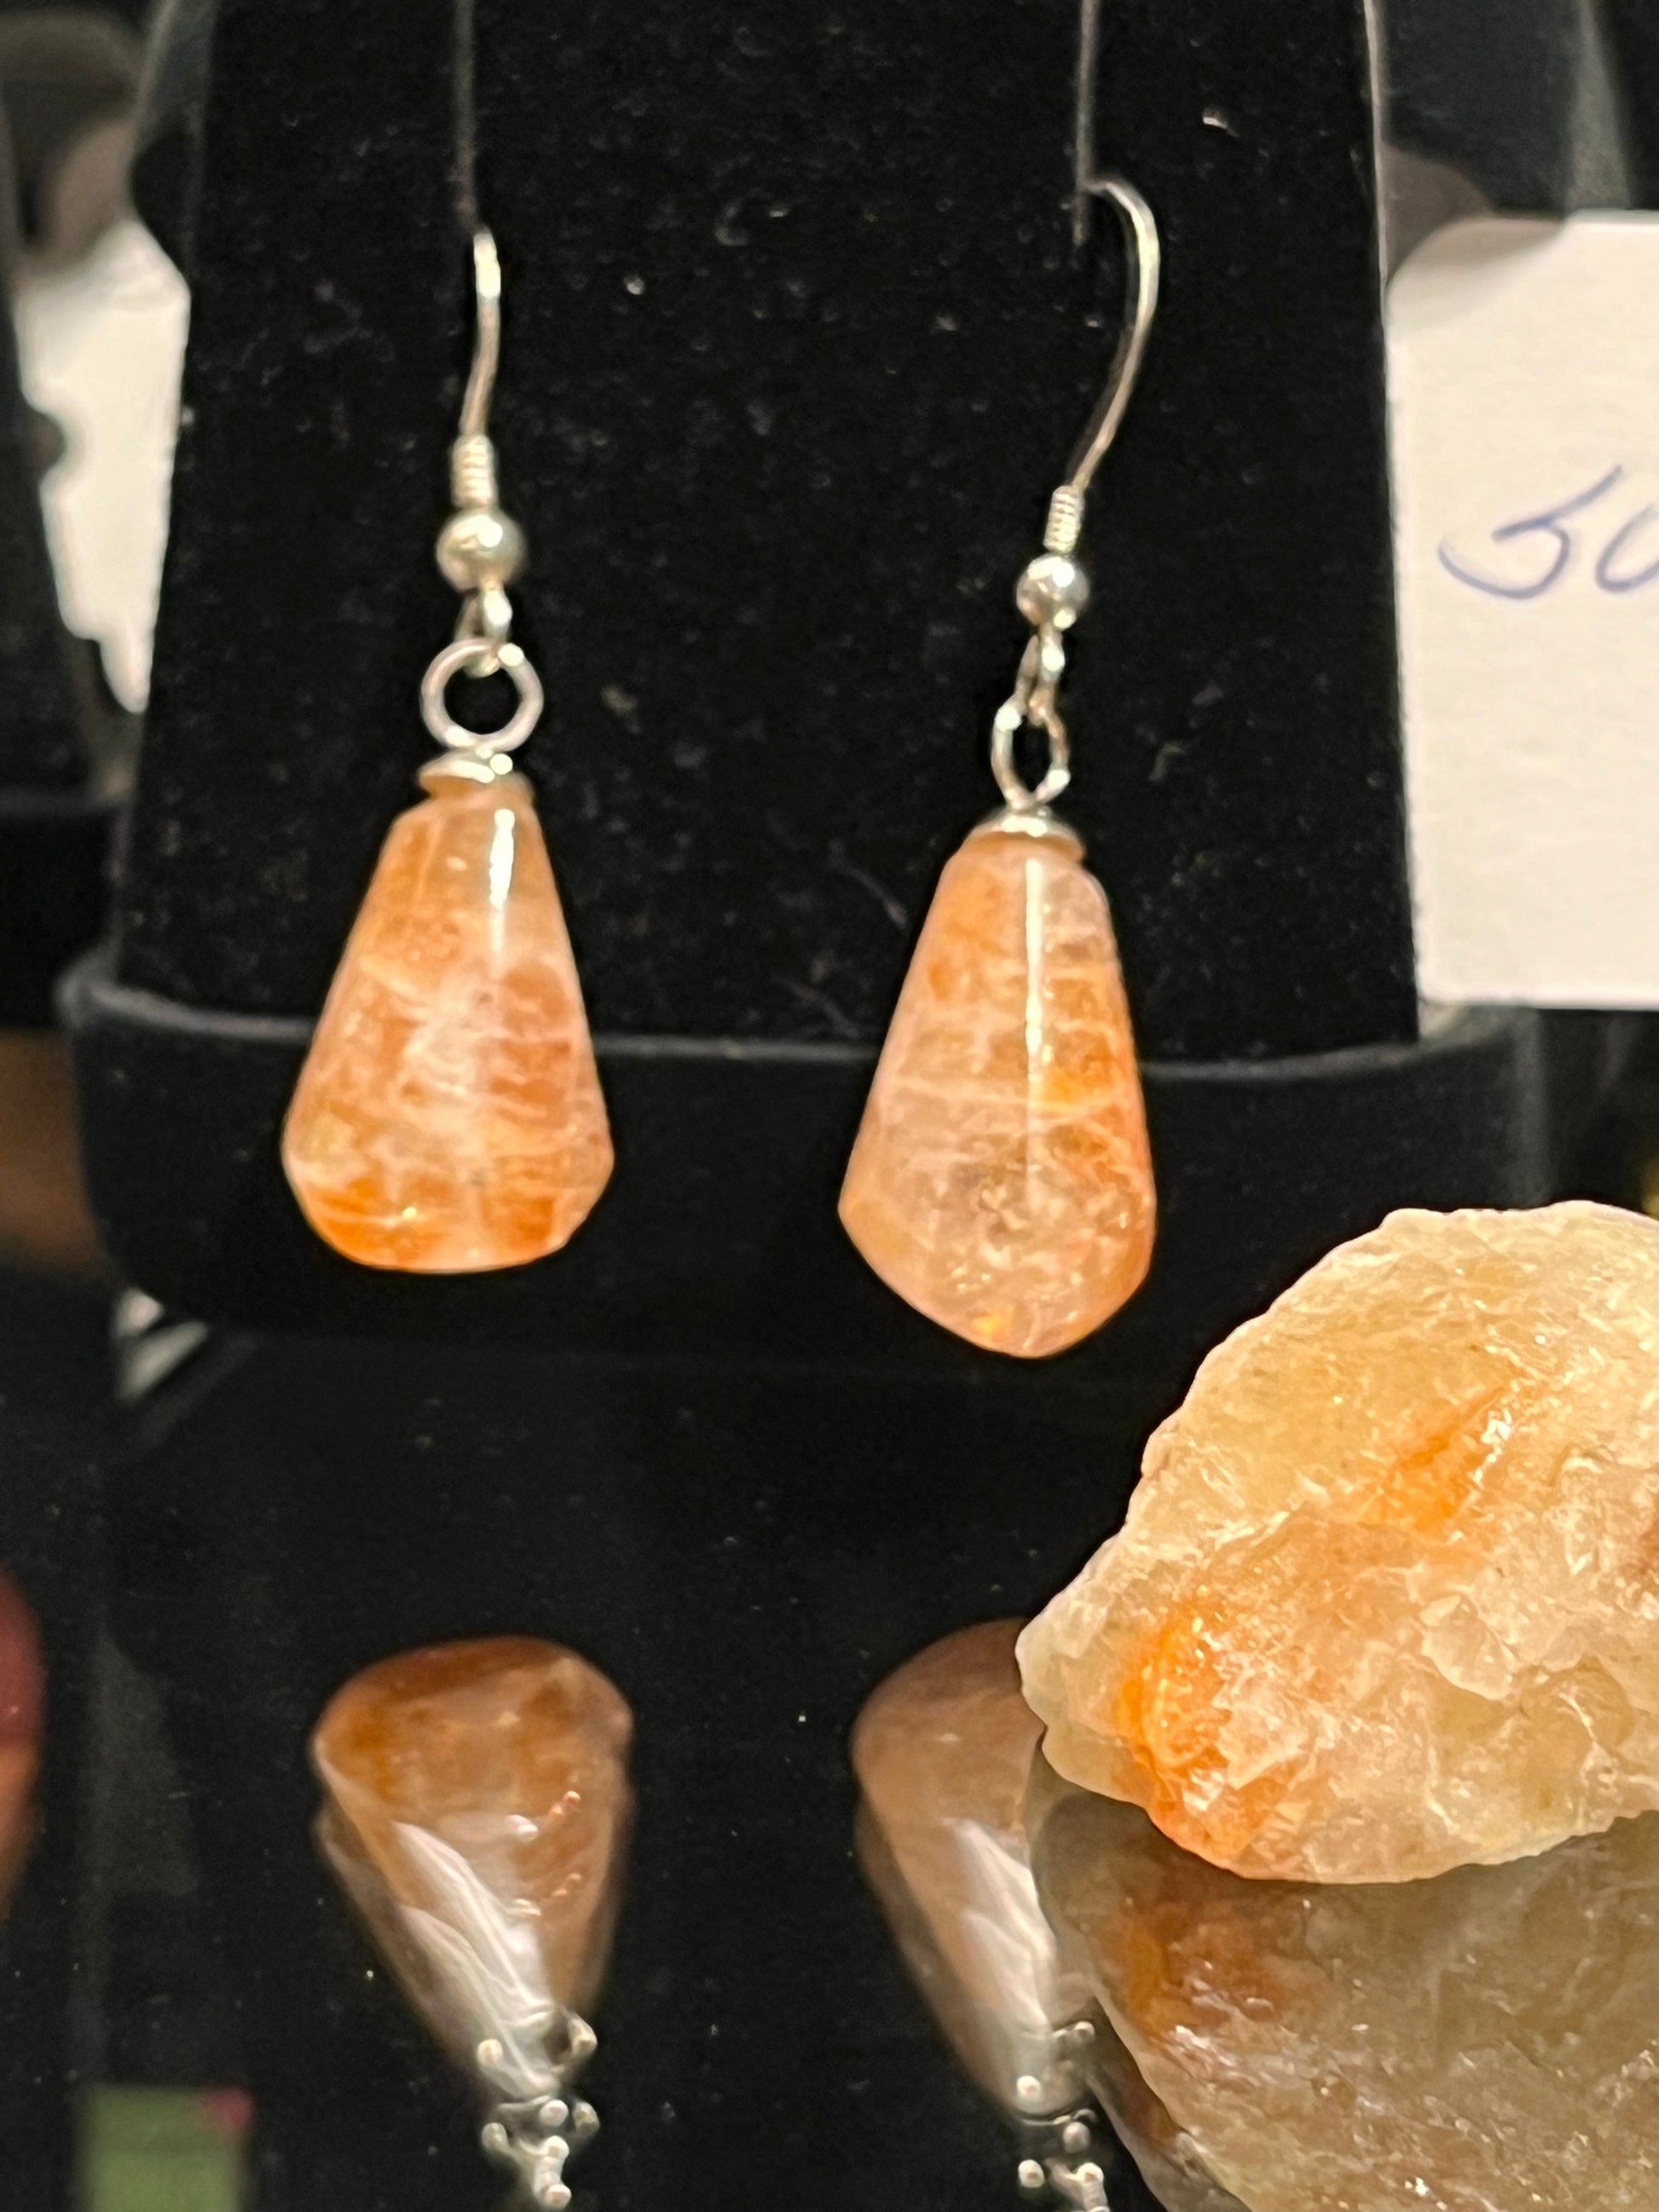 Pear-shaped sunstone earrings on silver. This unique piece of jewelry is authentic Alaska Native art created by an enrolled member of an Alaska Native tribe and is a certified Made in Alaska item. 